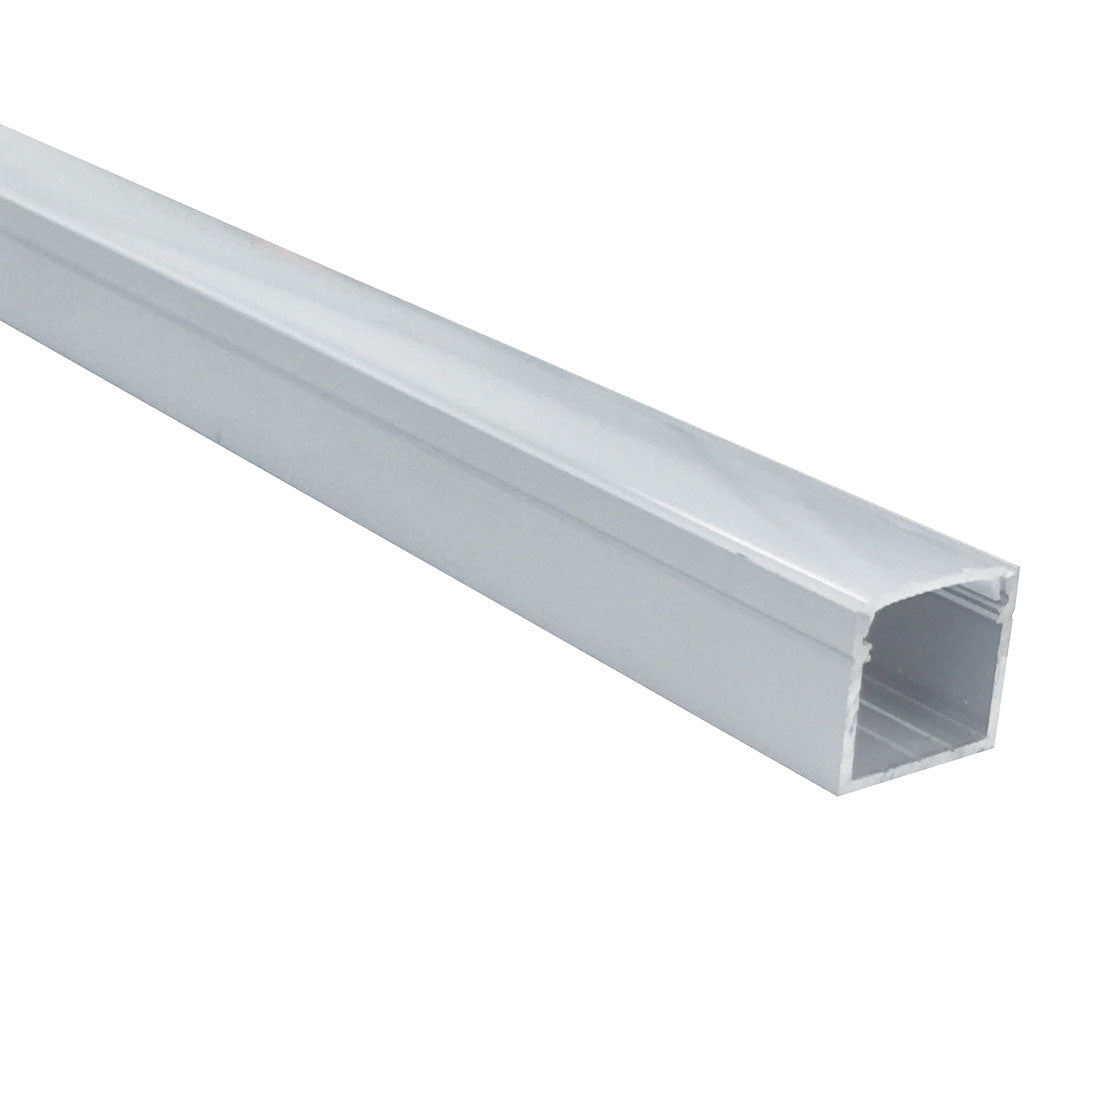 Nora Lighting NATL-C26A 4-ft Deep Channel(Plastic Diffuser and End Caps Included) - Aluminum